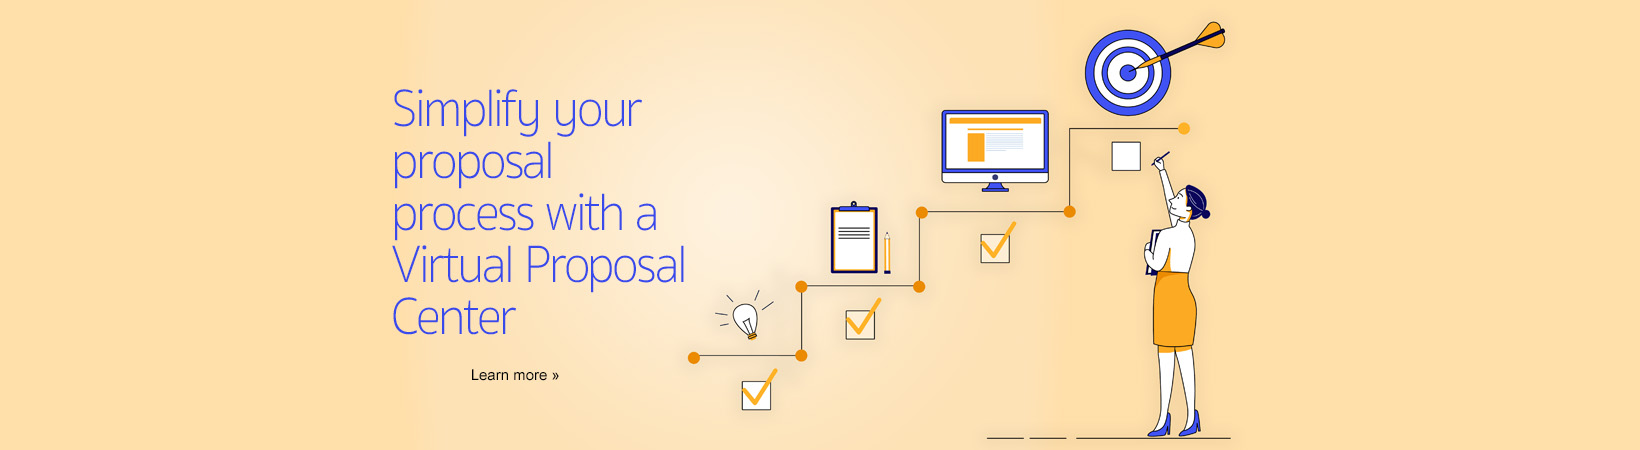 Simplify your proposal process with a Virtual Proposal Center